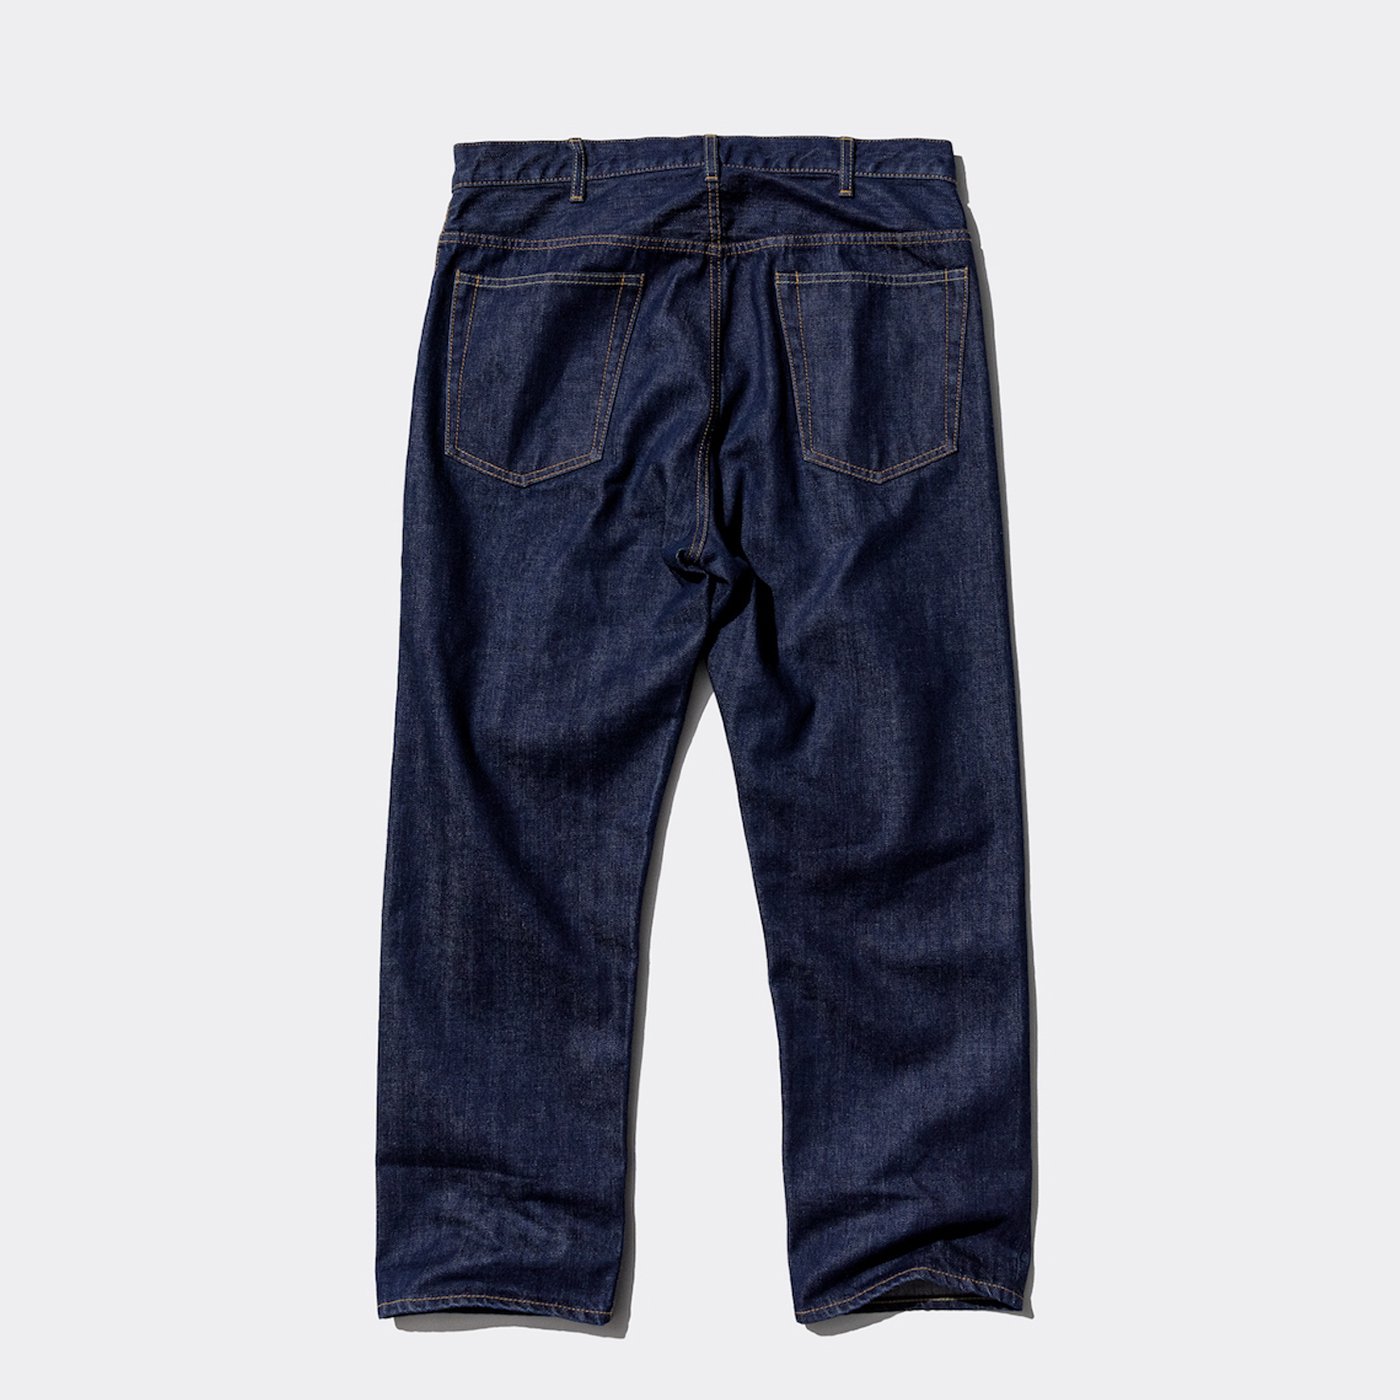 Unlikely * U24S-21-0001 Unlikely Time Travel Jeans * Indigo